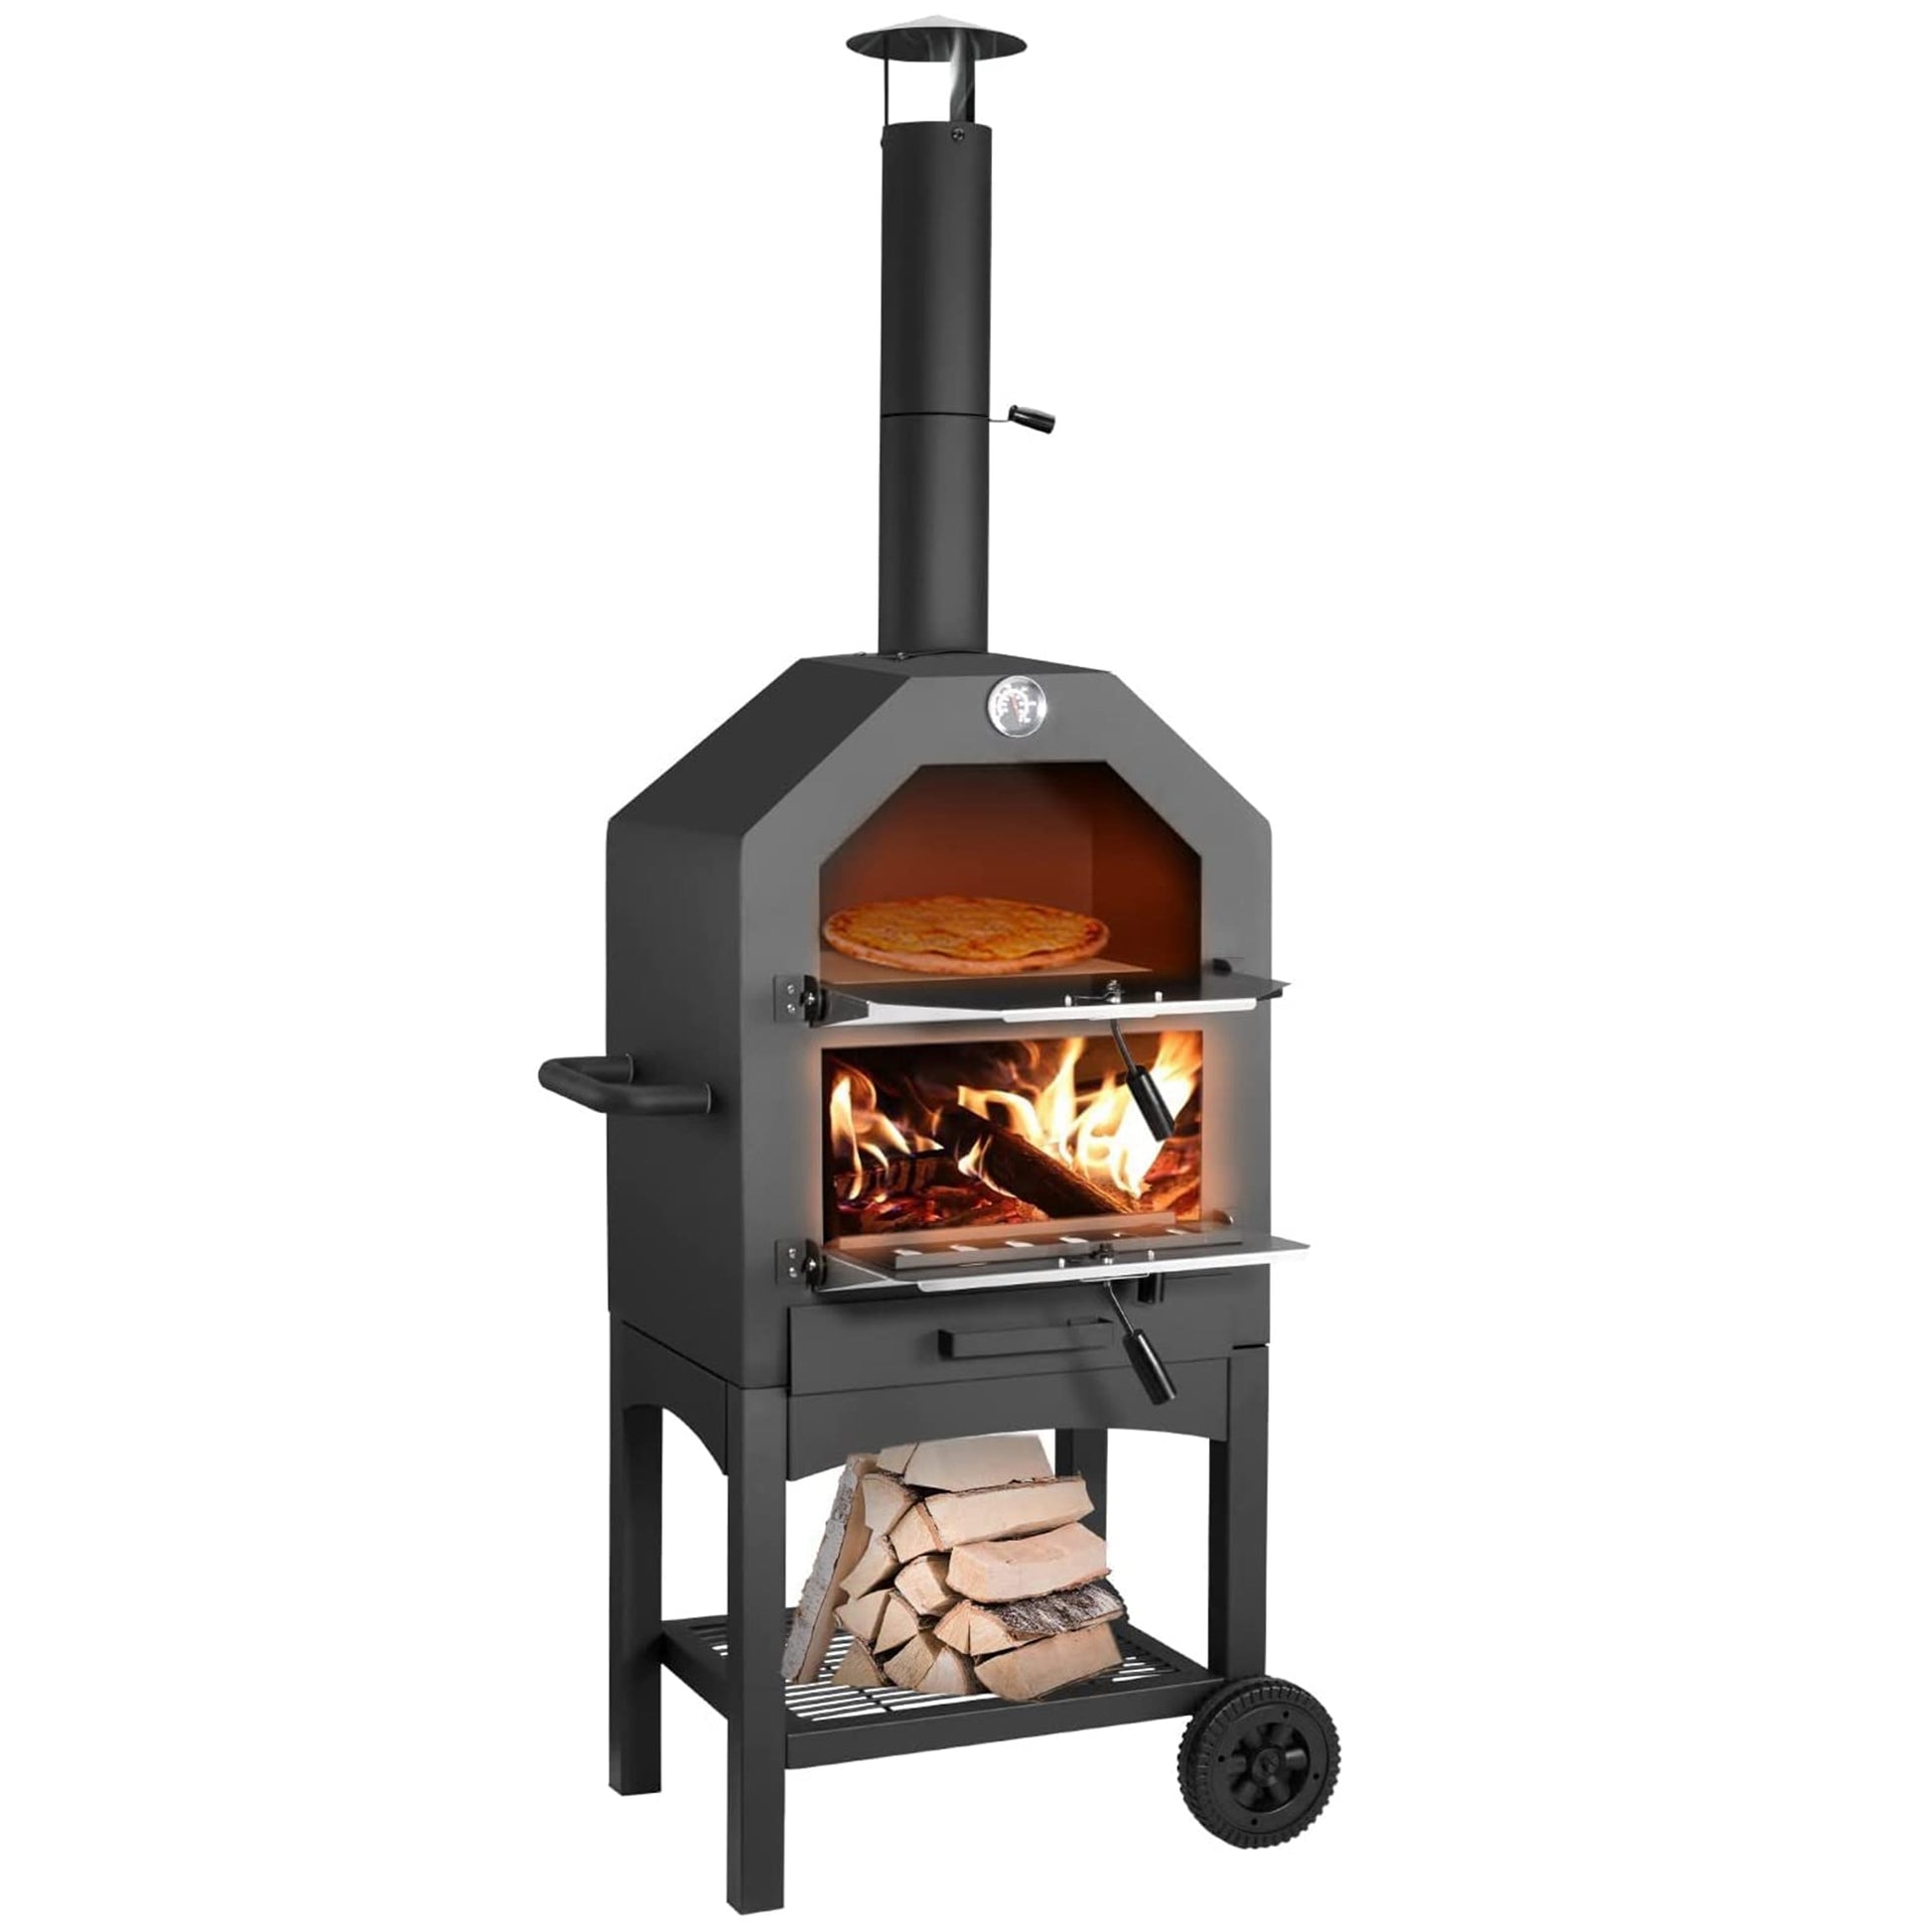 Outdoor Barbecue Grill Stainless Steel Pizza Oven with Wheel Wood and Coal Burning - OutdoorExplorersKit